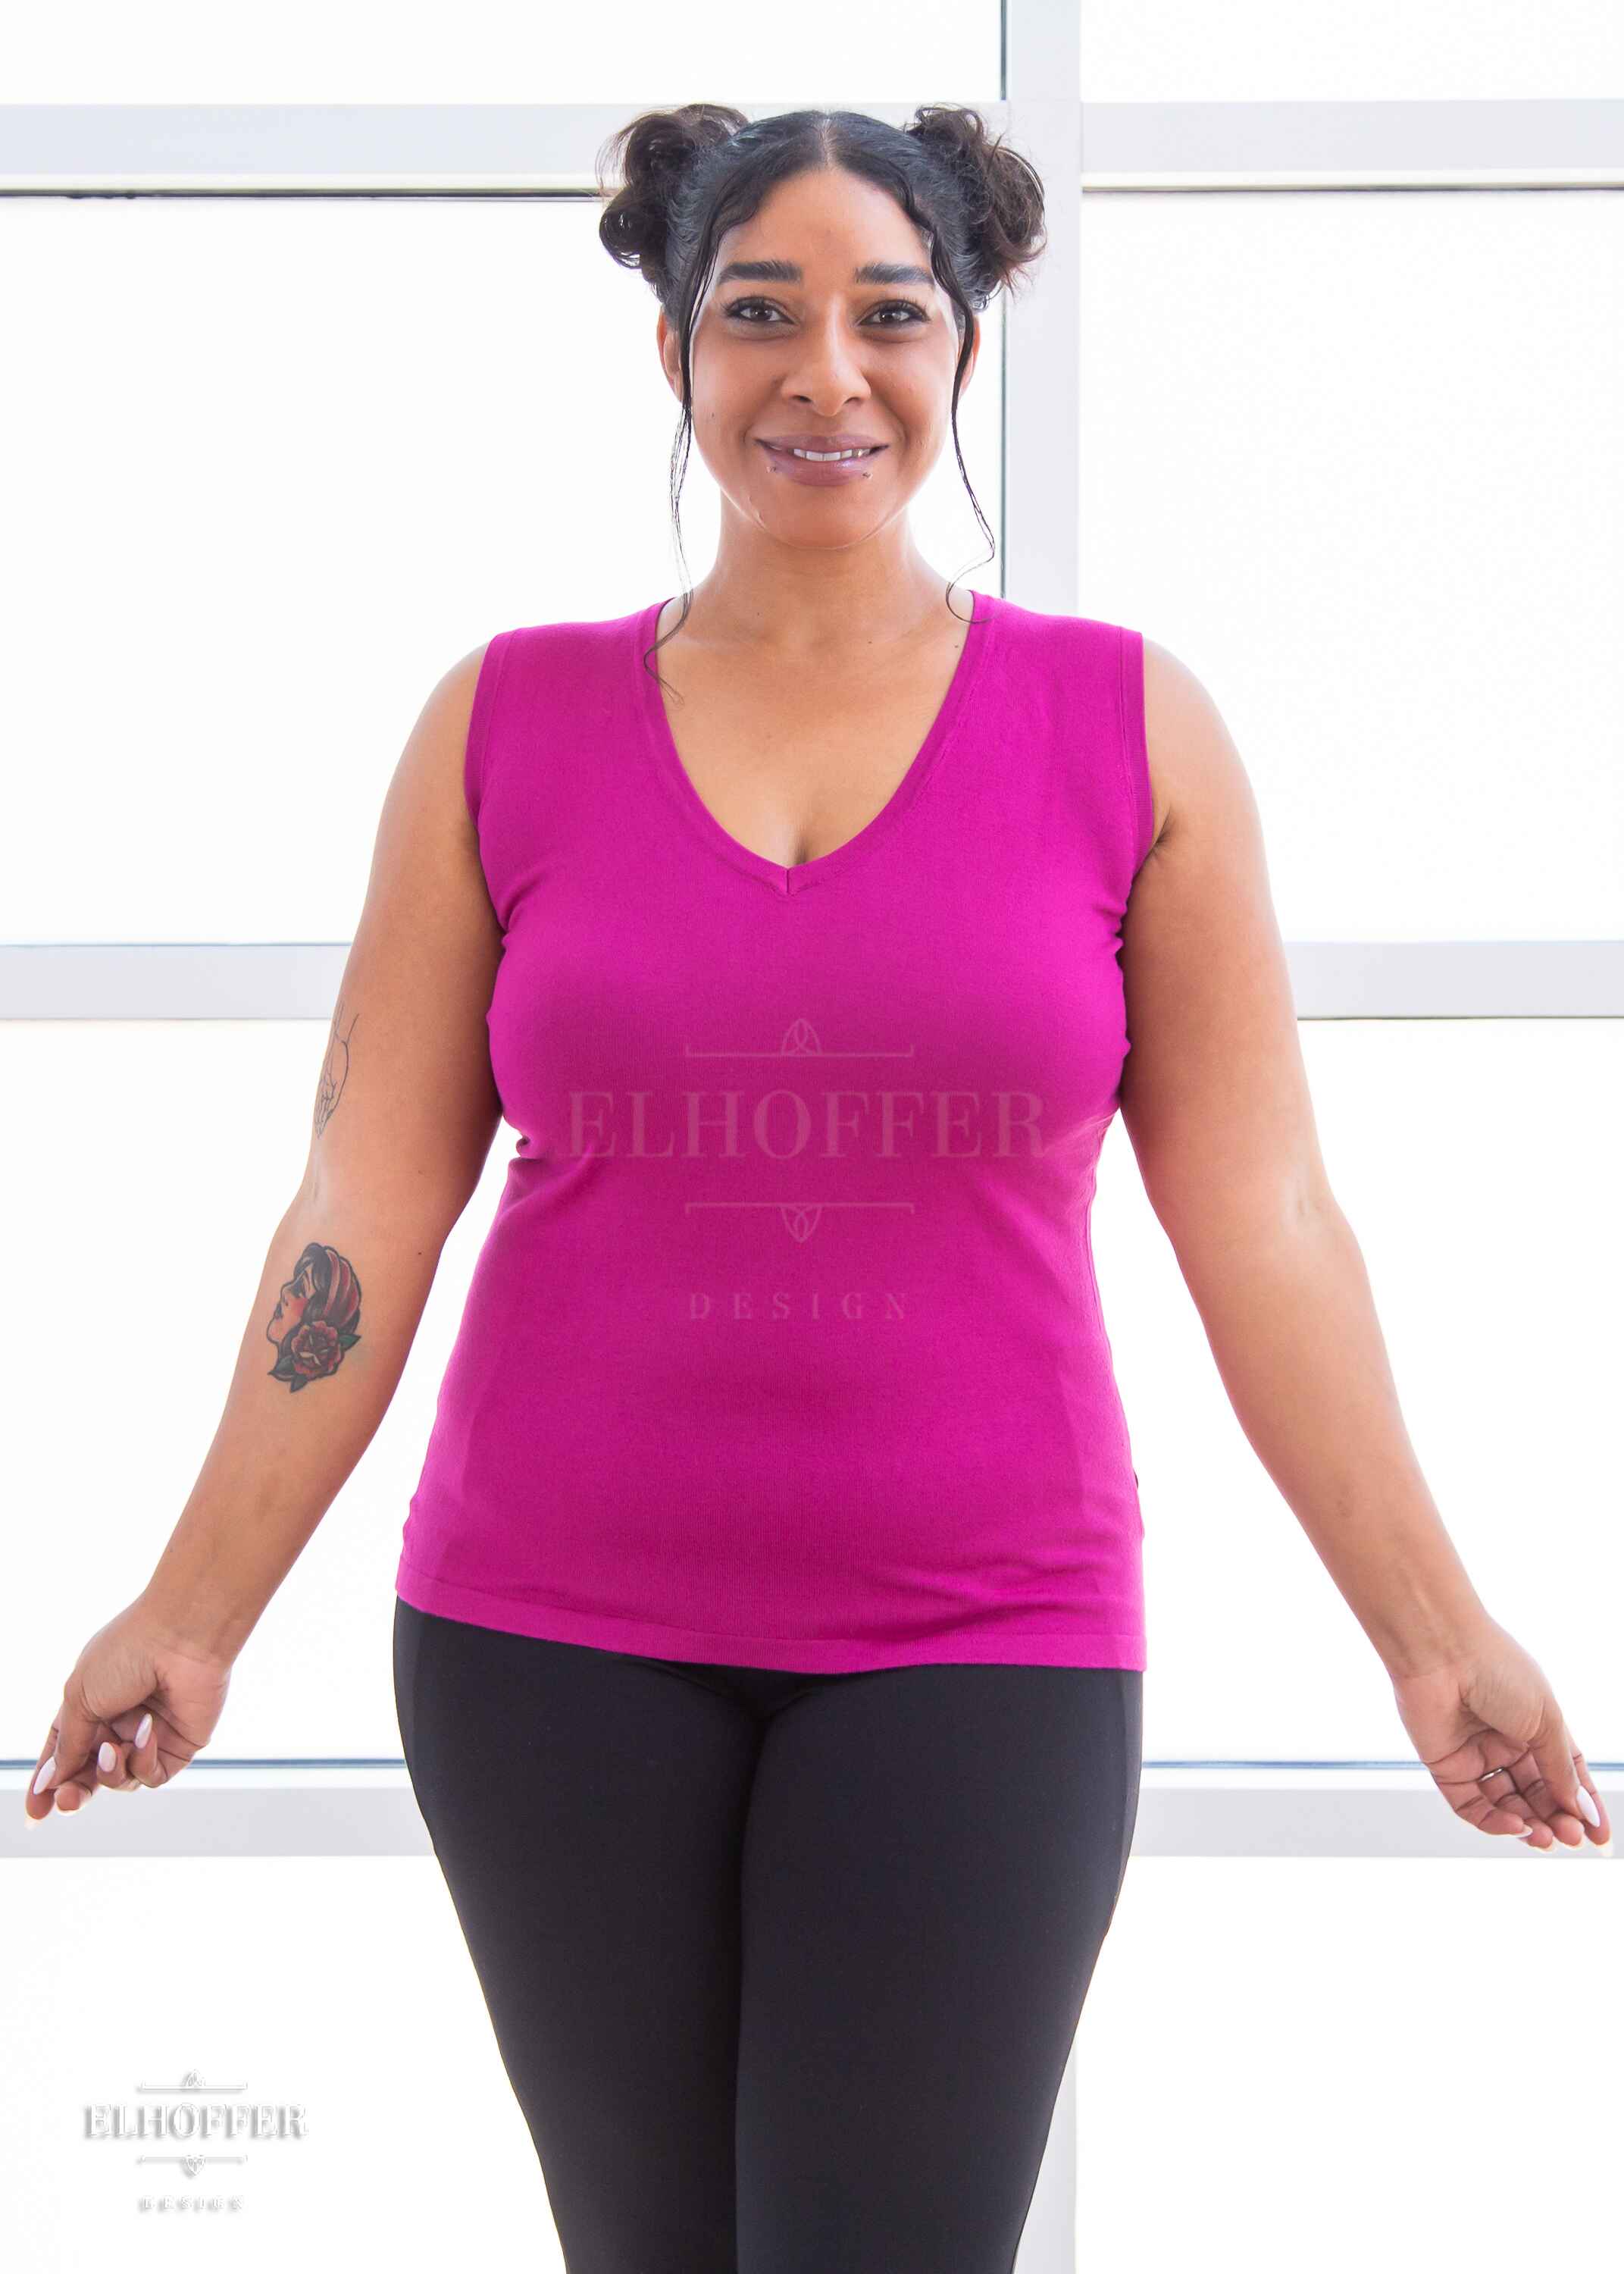 Janae, a light brown skinned L model with dark hair in space buns, is smiling while wearing a bright pink lightweight knit v neck tank top. The tank top hits about mid hip in length.